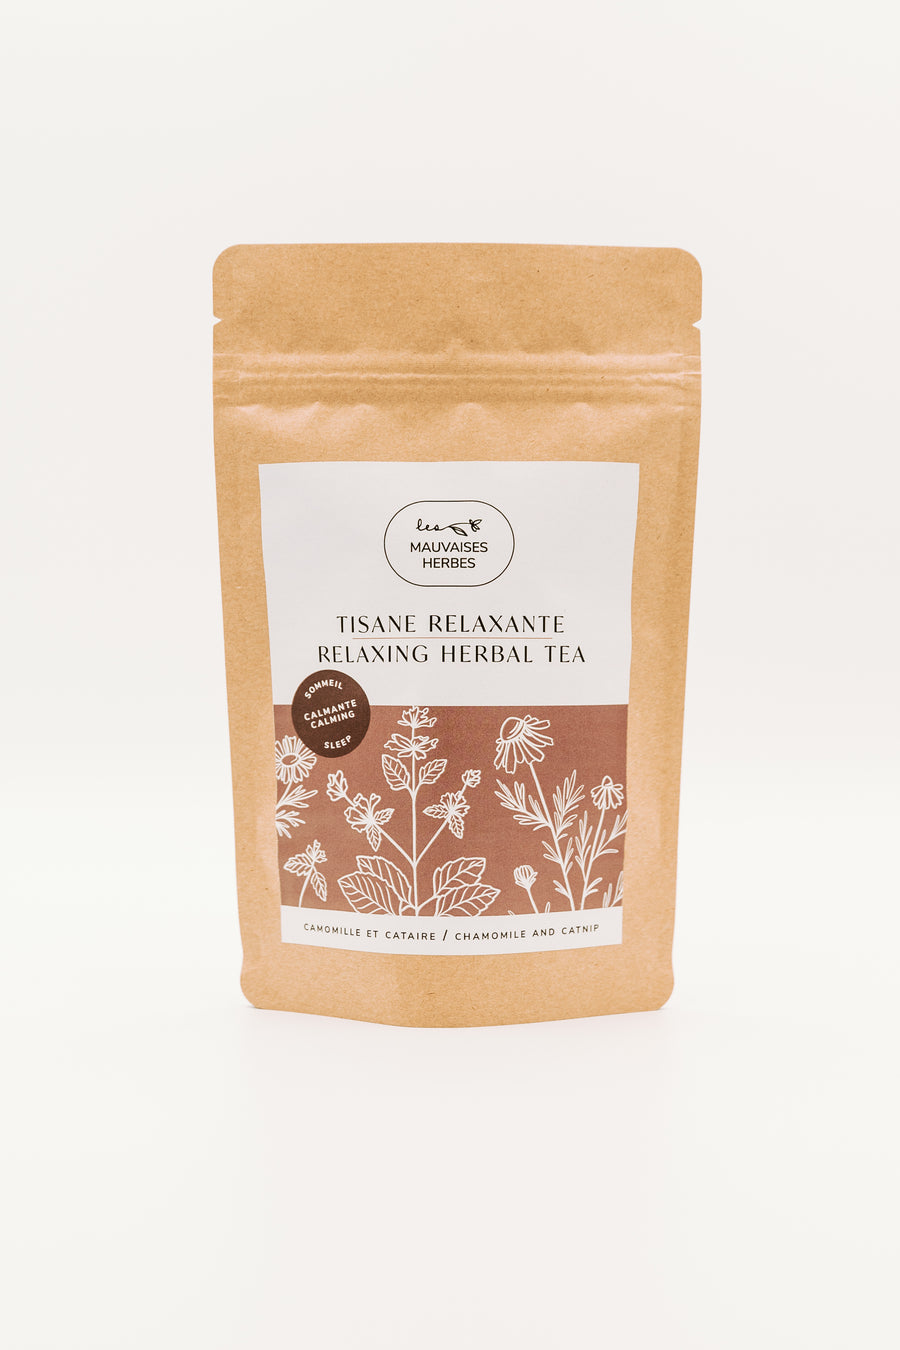 Tisane relaxante - camomille et cataire - Les Mauvaises Herbes